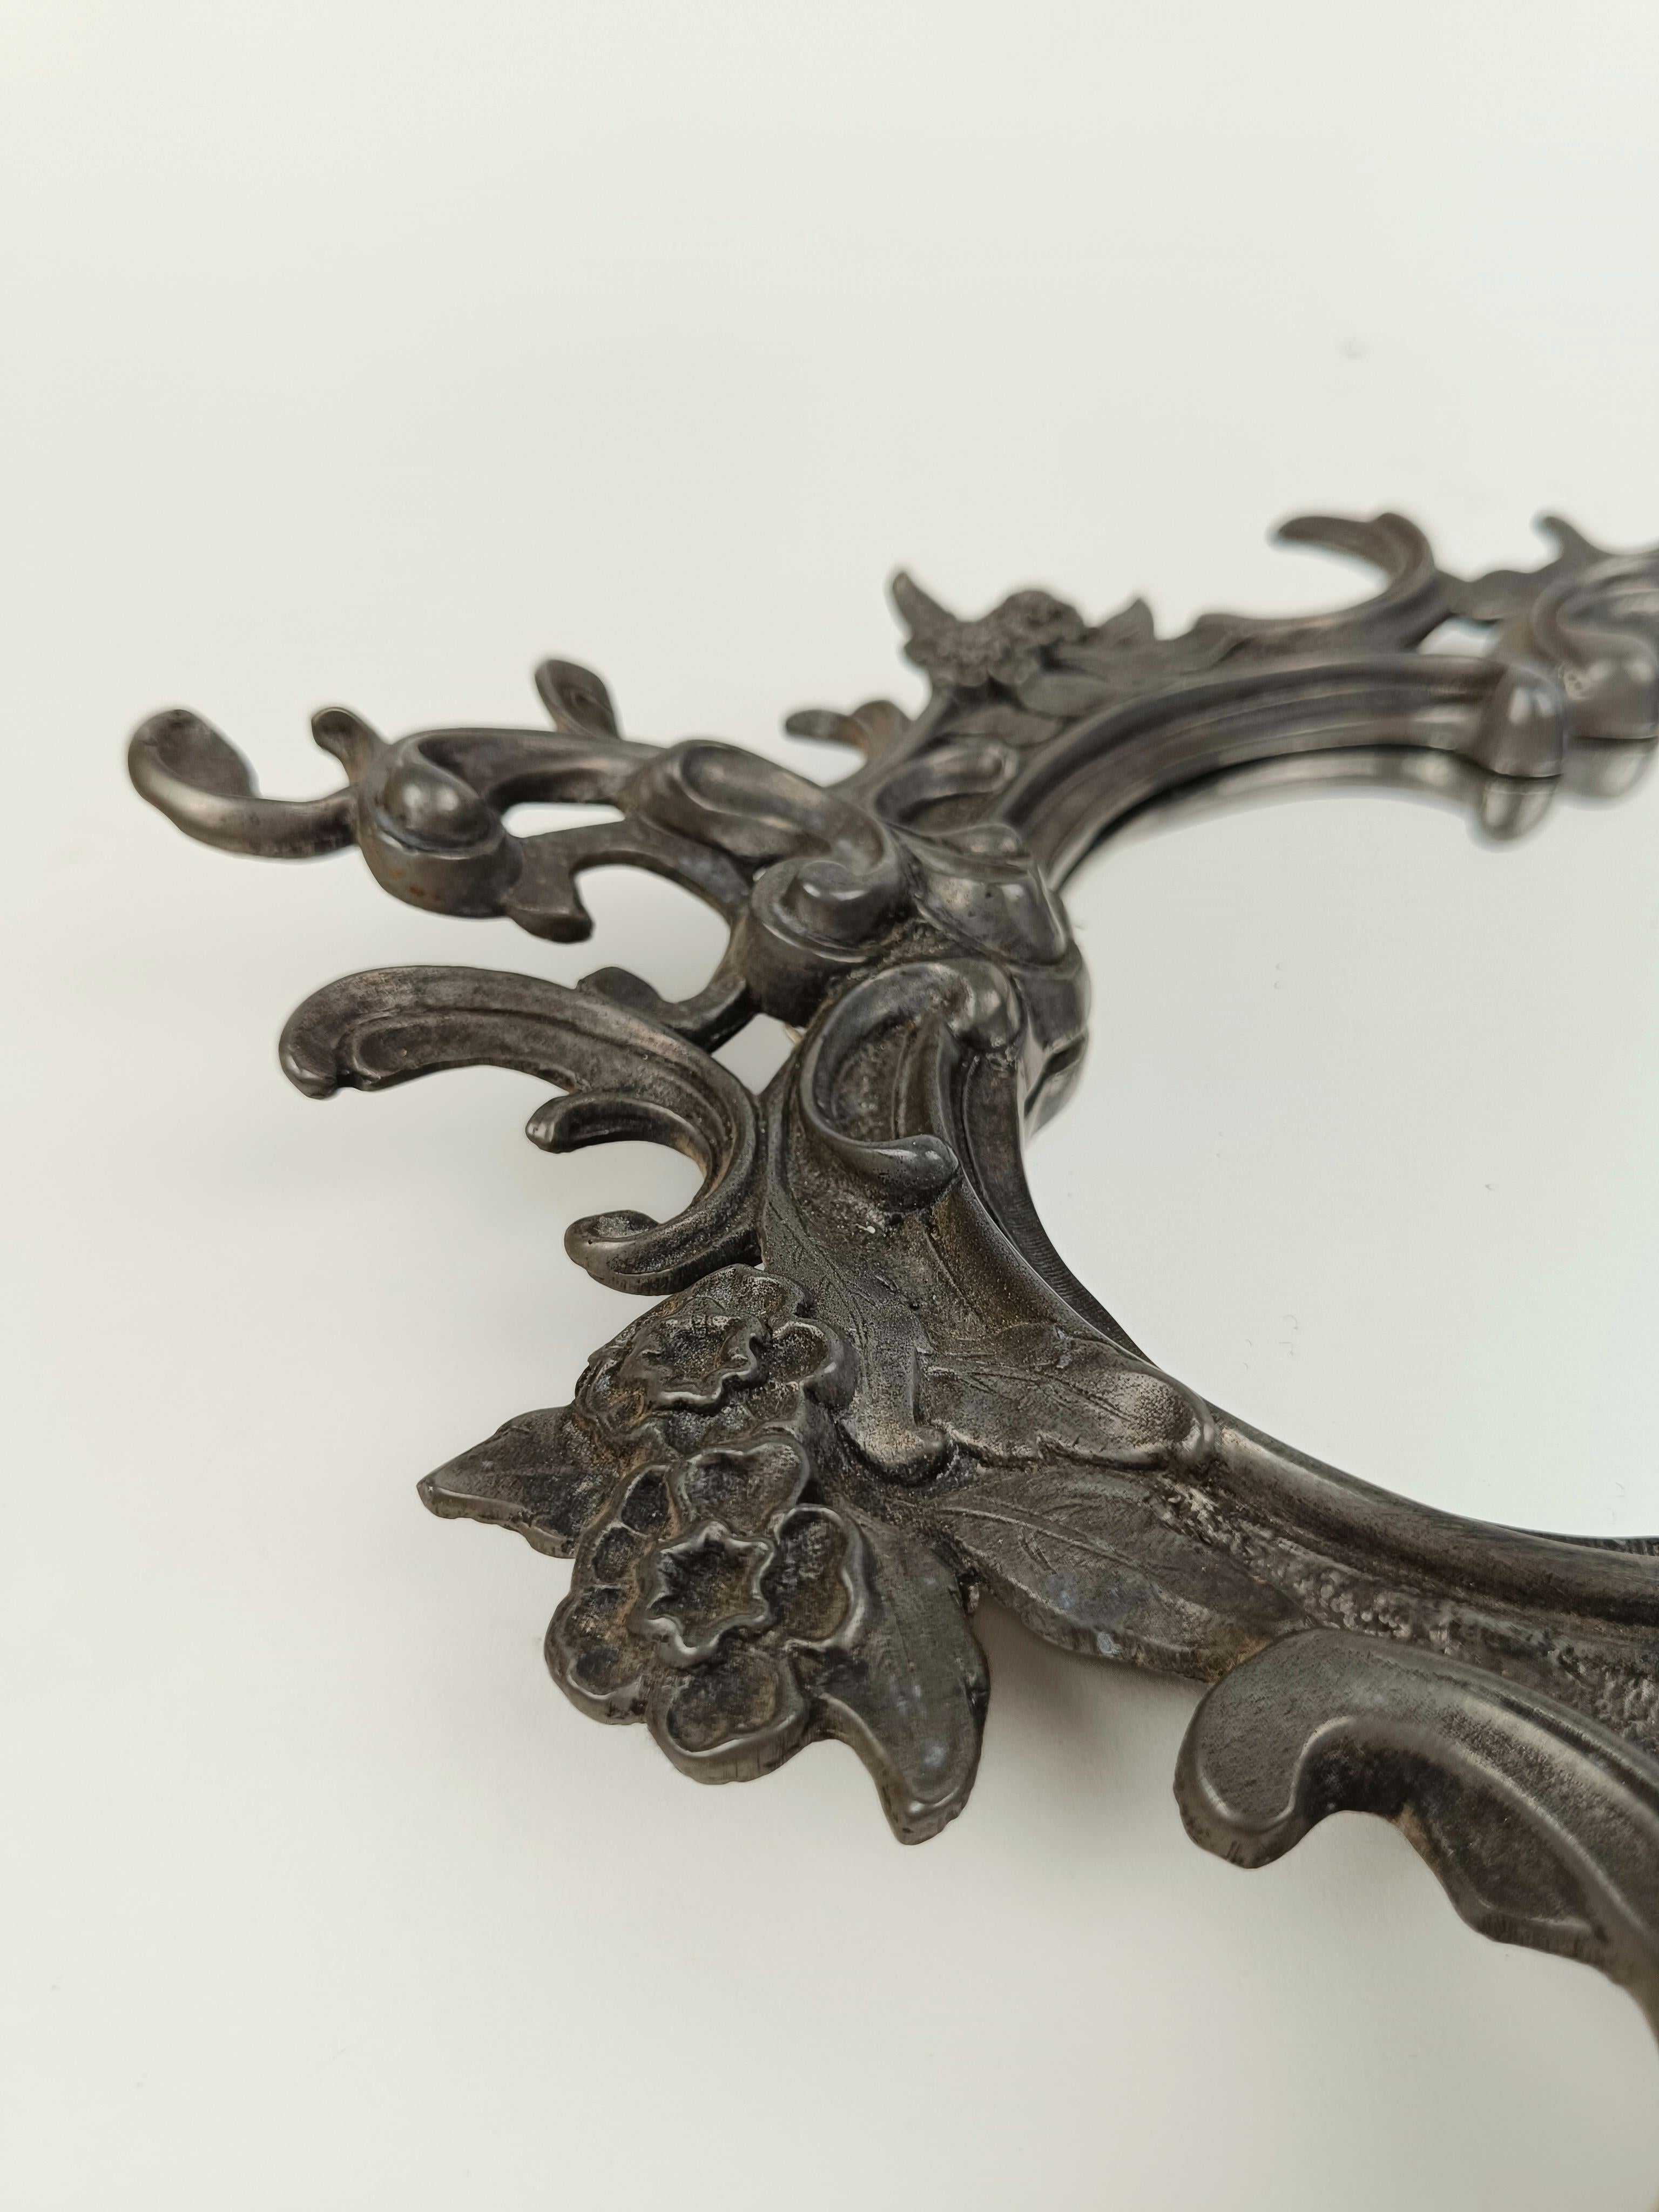 A vintage mirror made around the first half of the 20th century but in the style of 18th century European antique mirrors in the Baroque or Rococo style.
The structure with an irregular and sinuous shape is made of hand-chiseled german silver